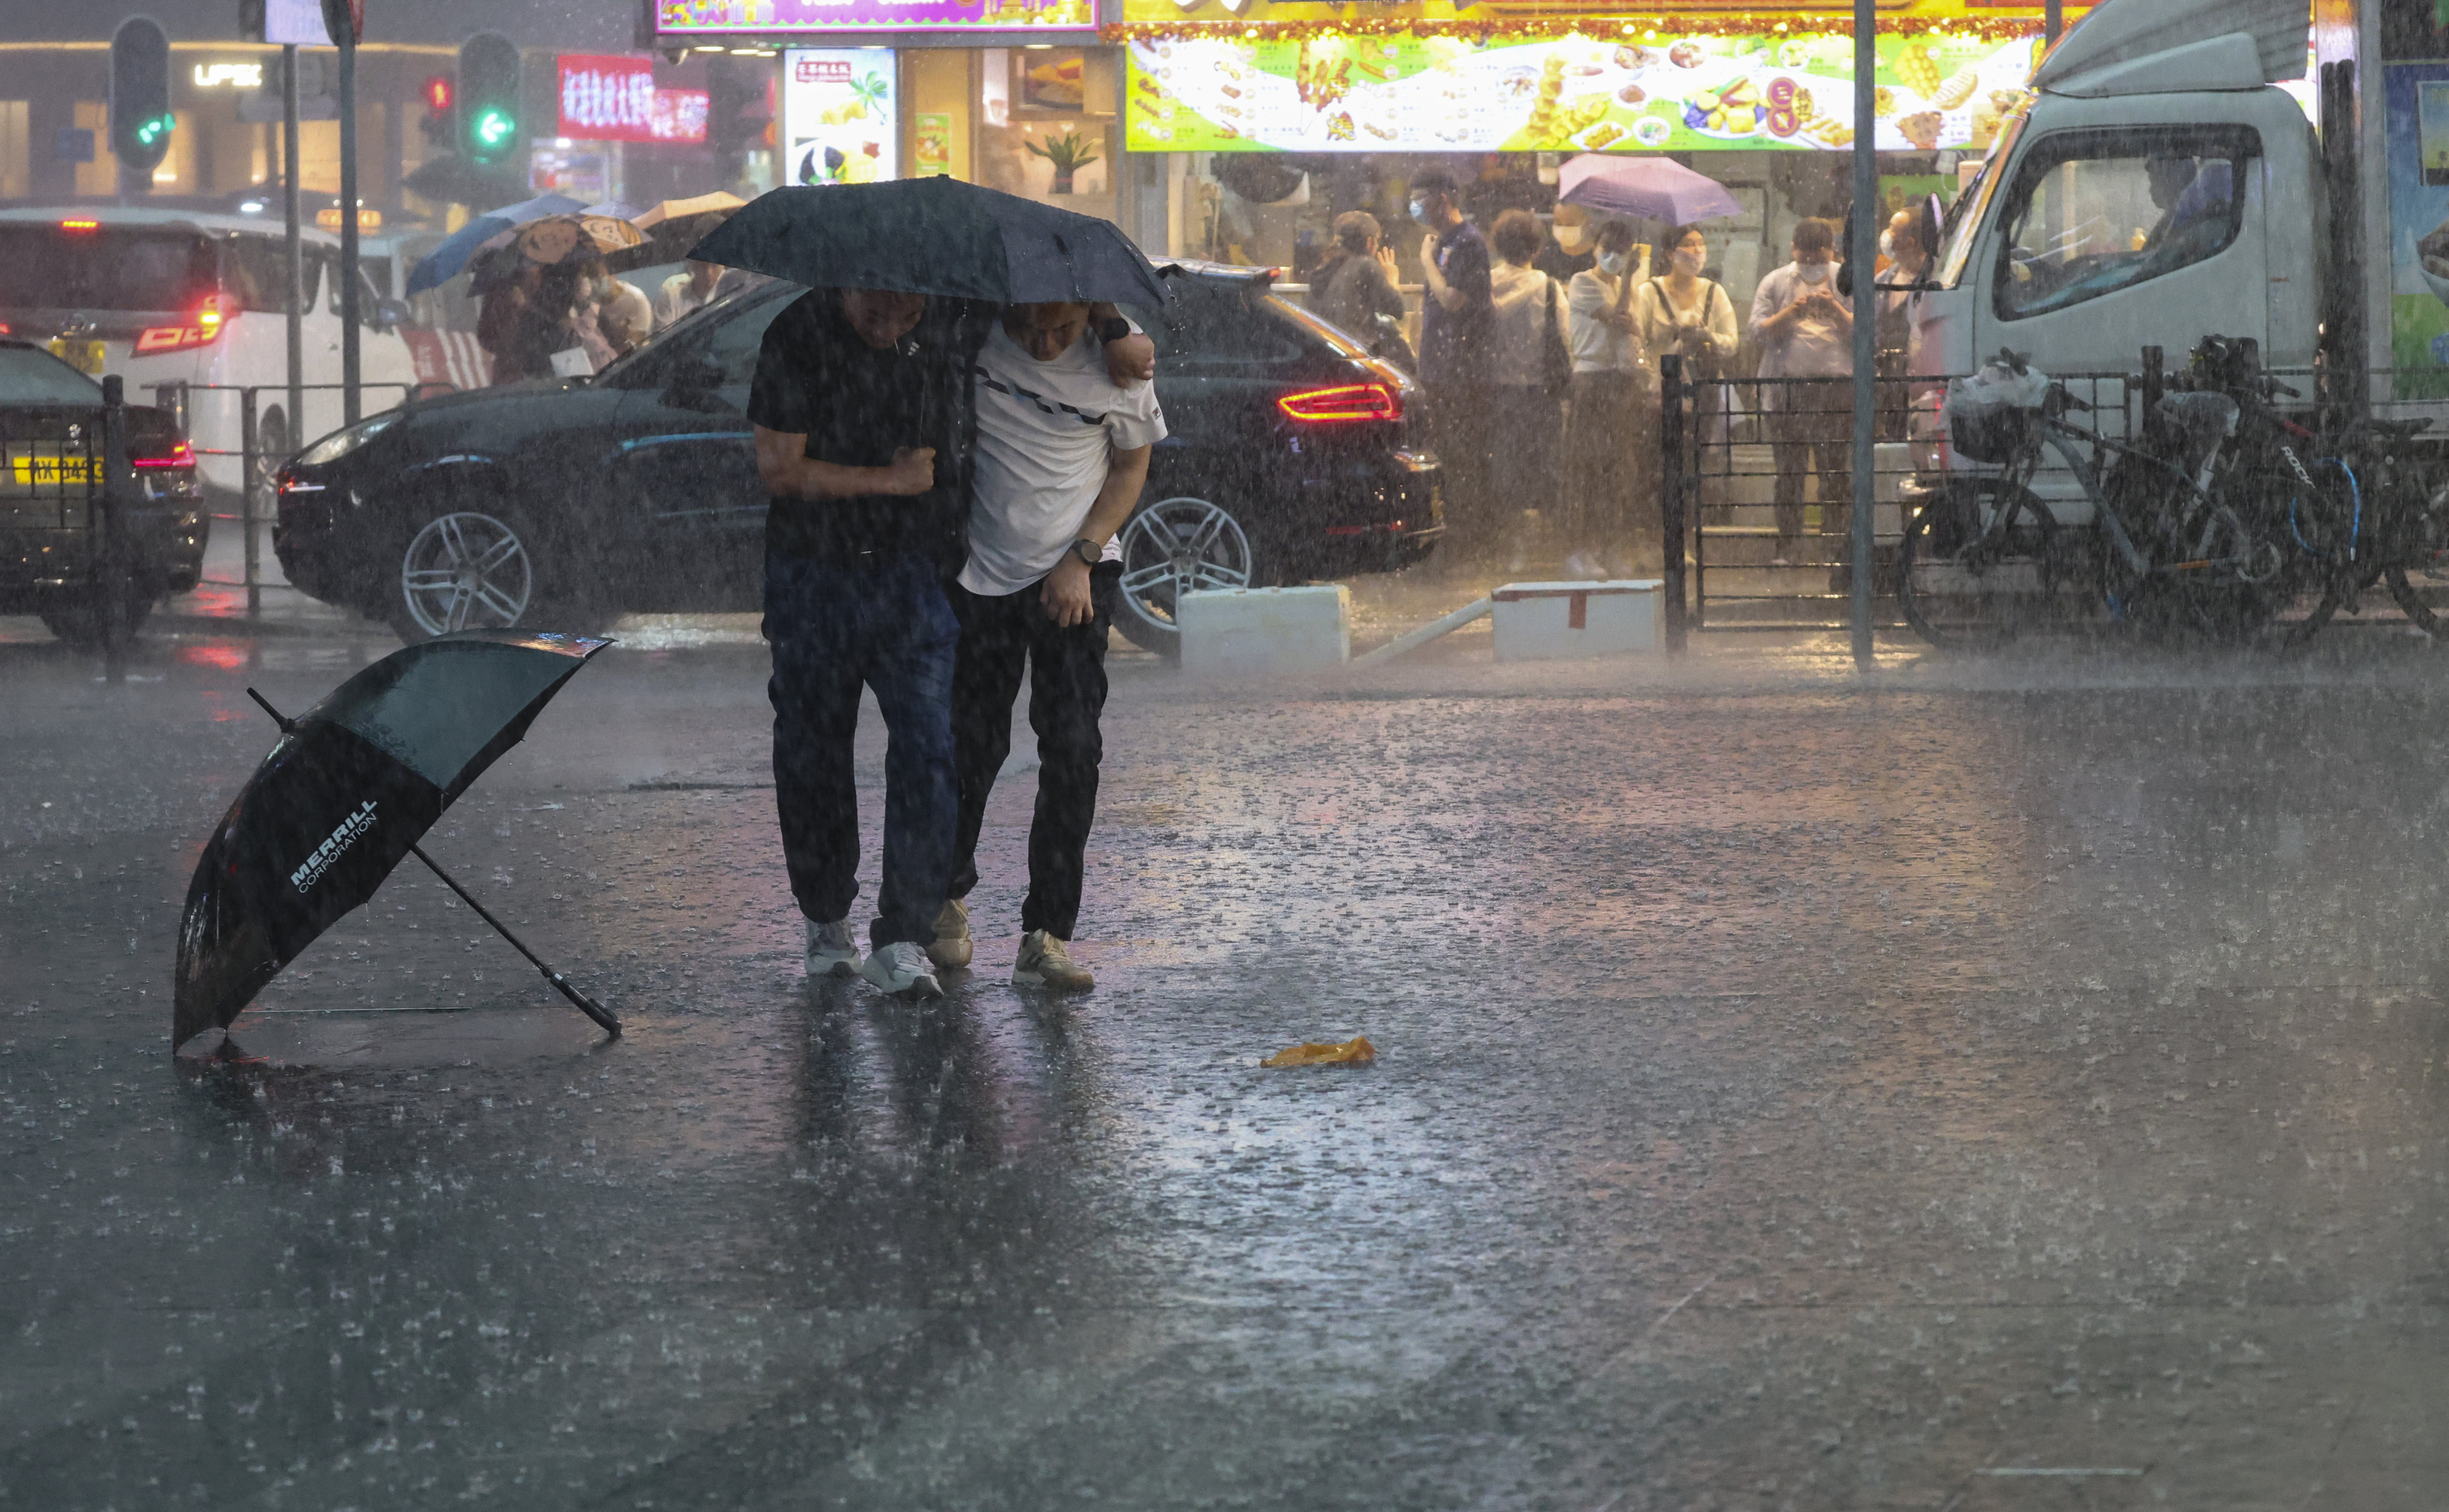 The city has been affected by unsettled weather in recent days. Photo: Edmond So